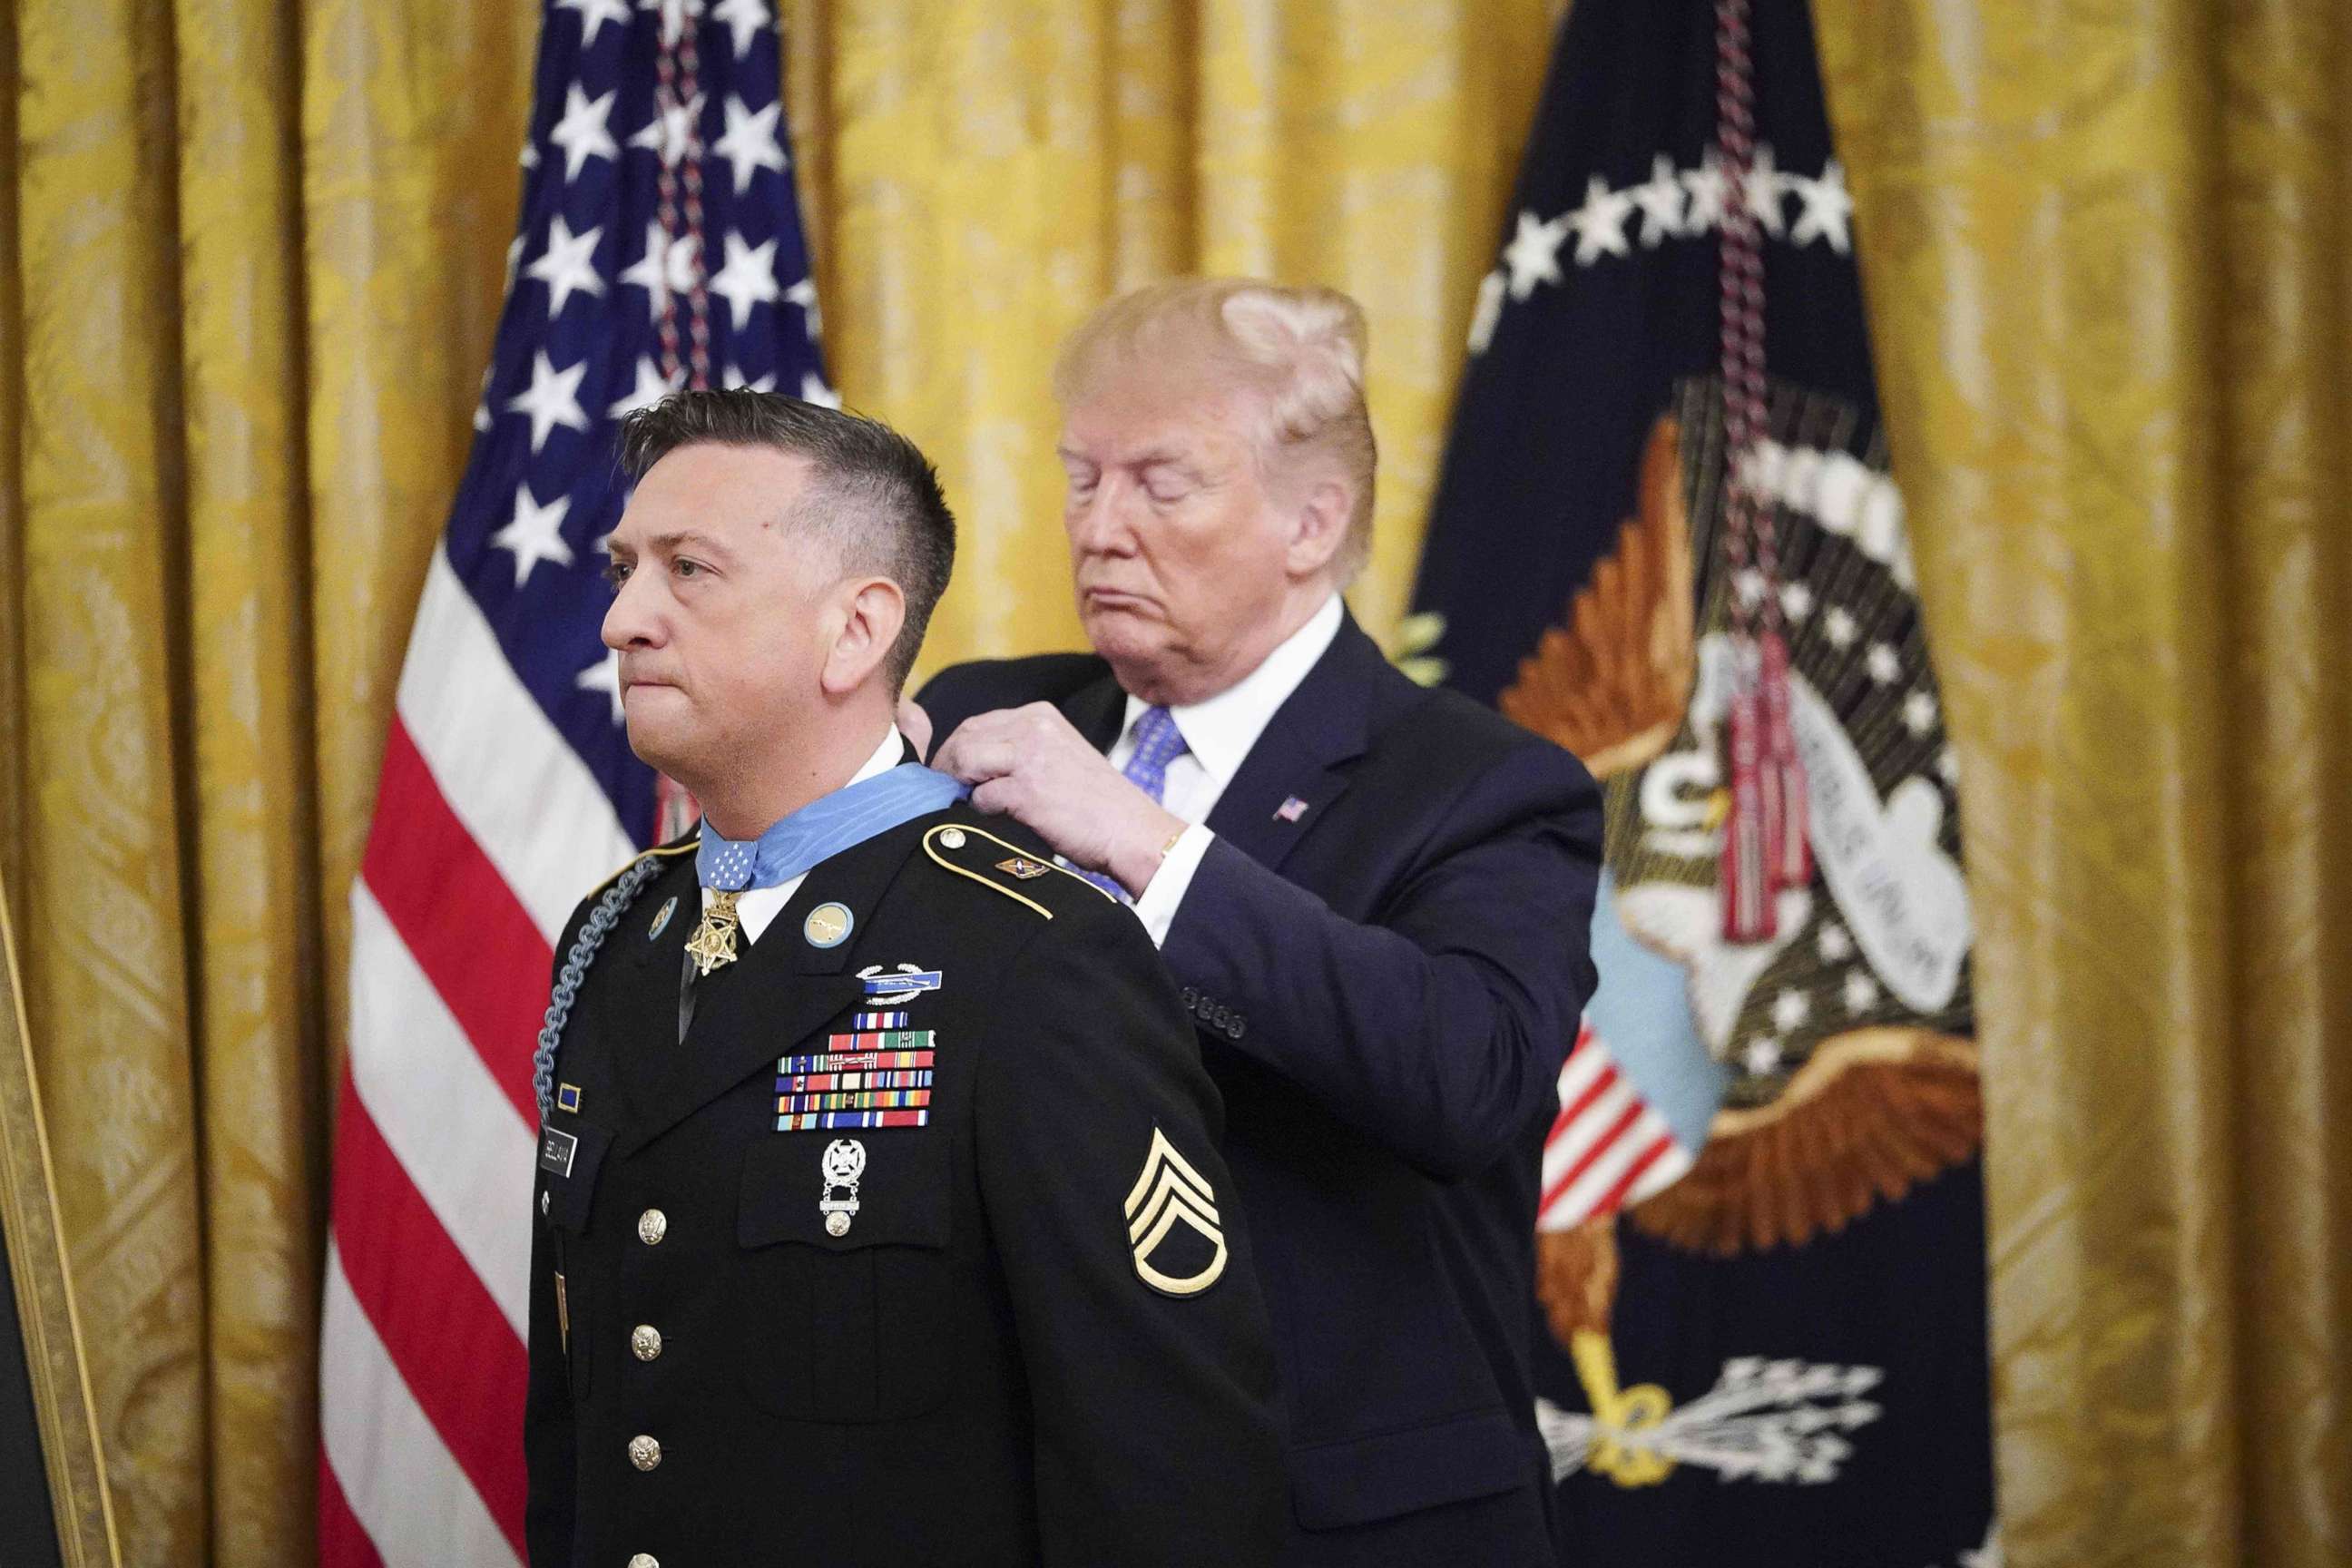 PHOTO: President Donald Trump presents the Medal of Honor to David Bellavia in the East Room of the White House in Washington on June 25, 2019.